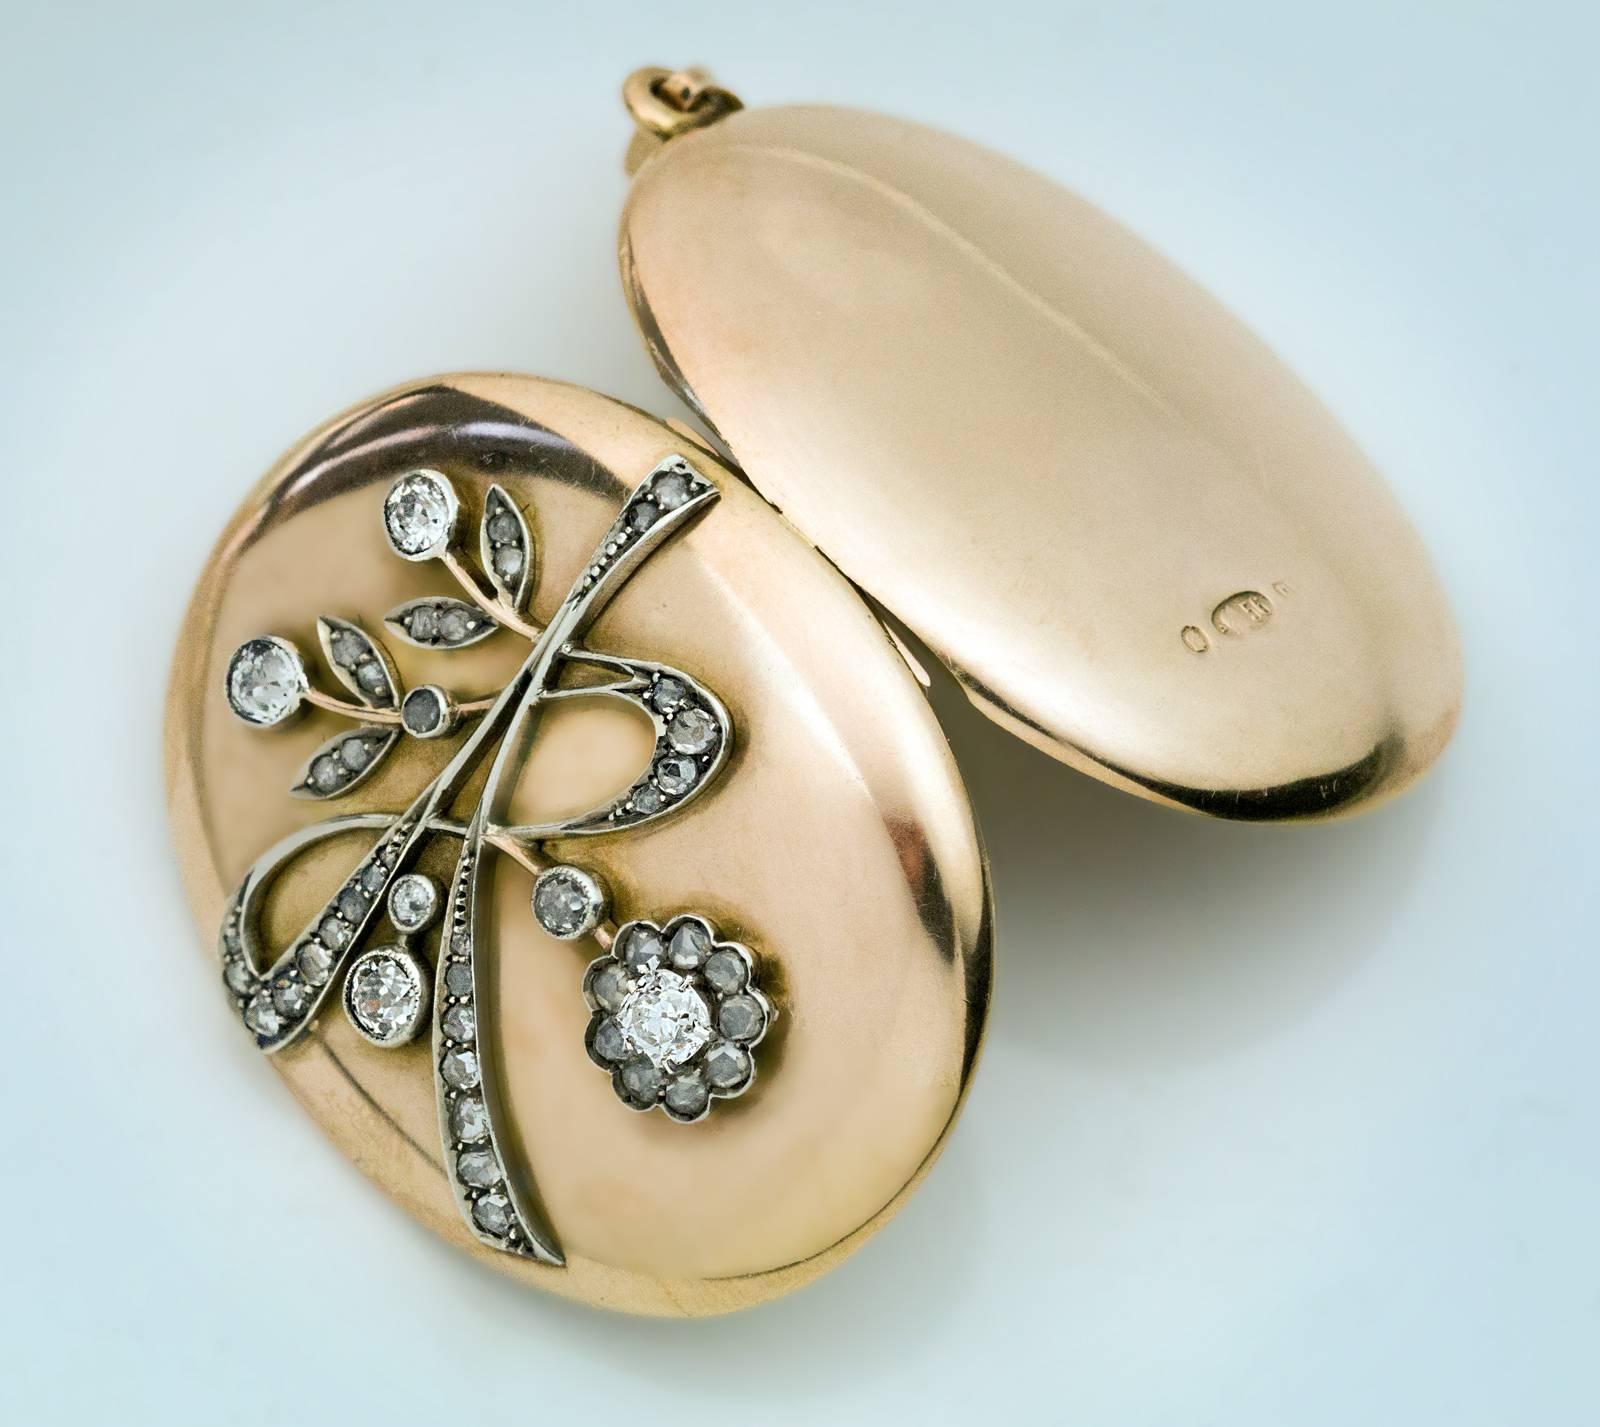 Made in Moscow between 1908 and 1917

The locket is embellished with a stylized diamond flower in Art Nouveau taste.The flower is made of silver and set with six brilliant cut diamonds and numerous rose cut diamonds.
The interior is set with a